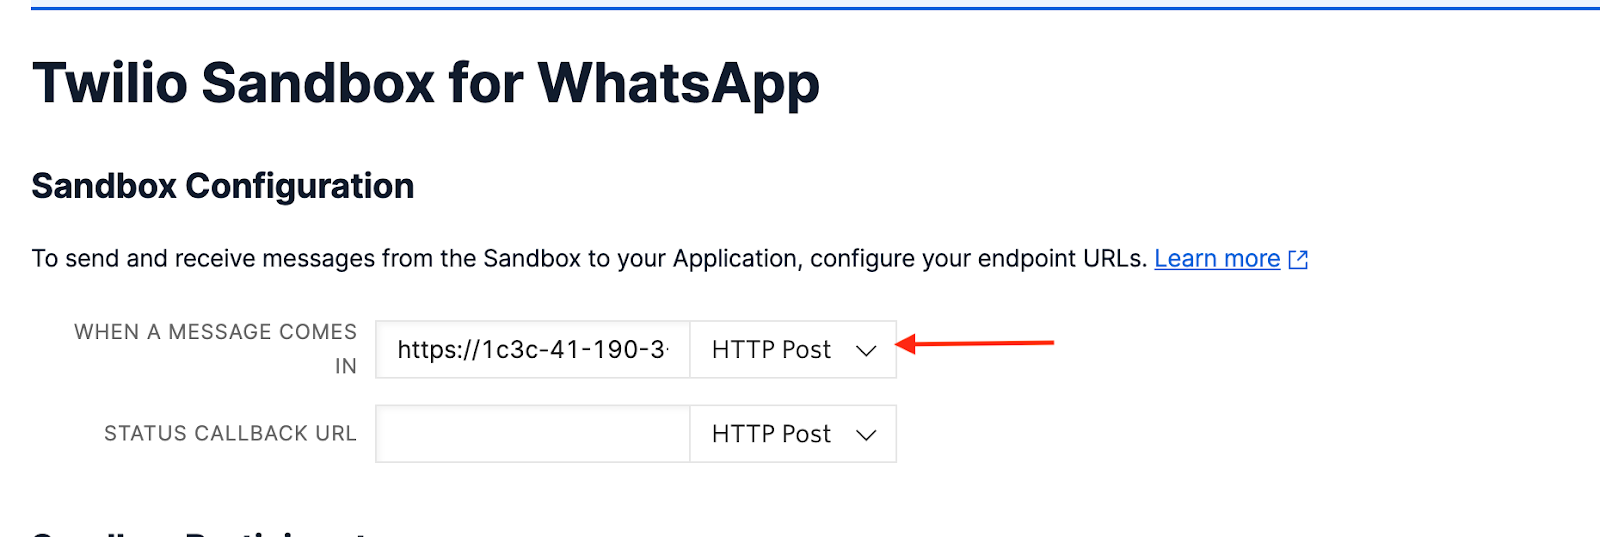 The Twilio Sandbox for WhatsApp Sandbox Configuration form highlighting the value to set for "When a message comes in"